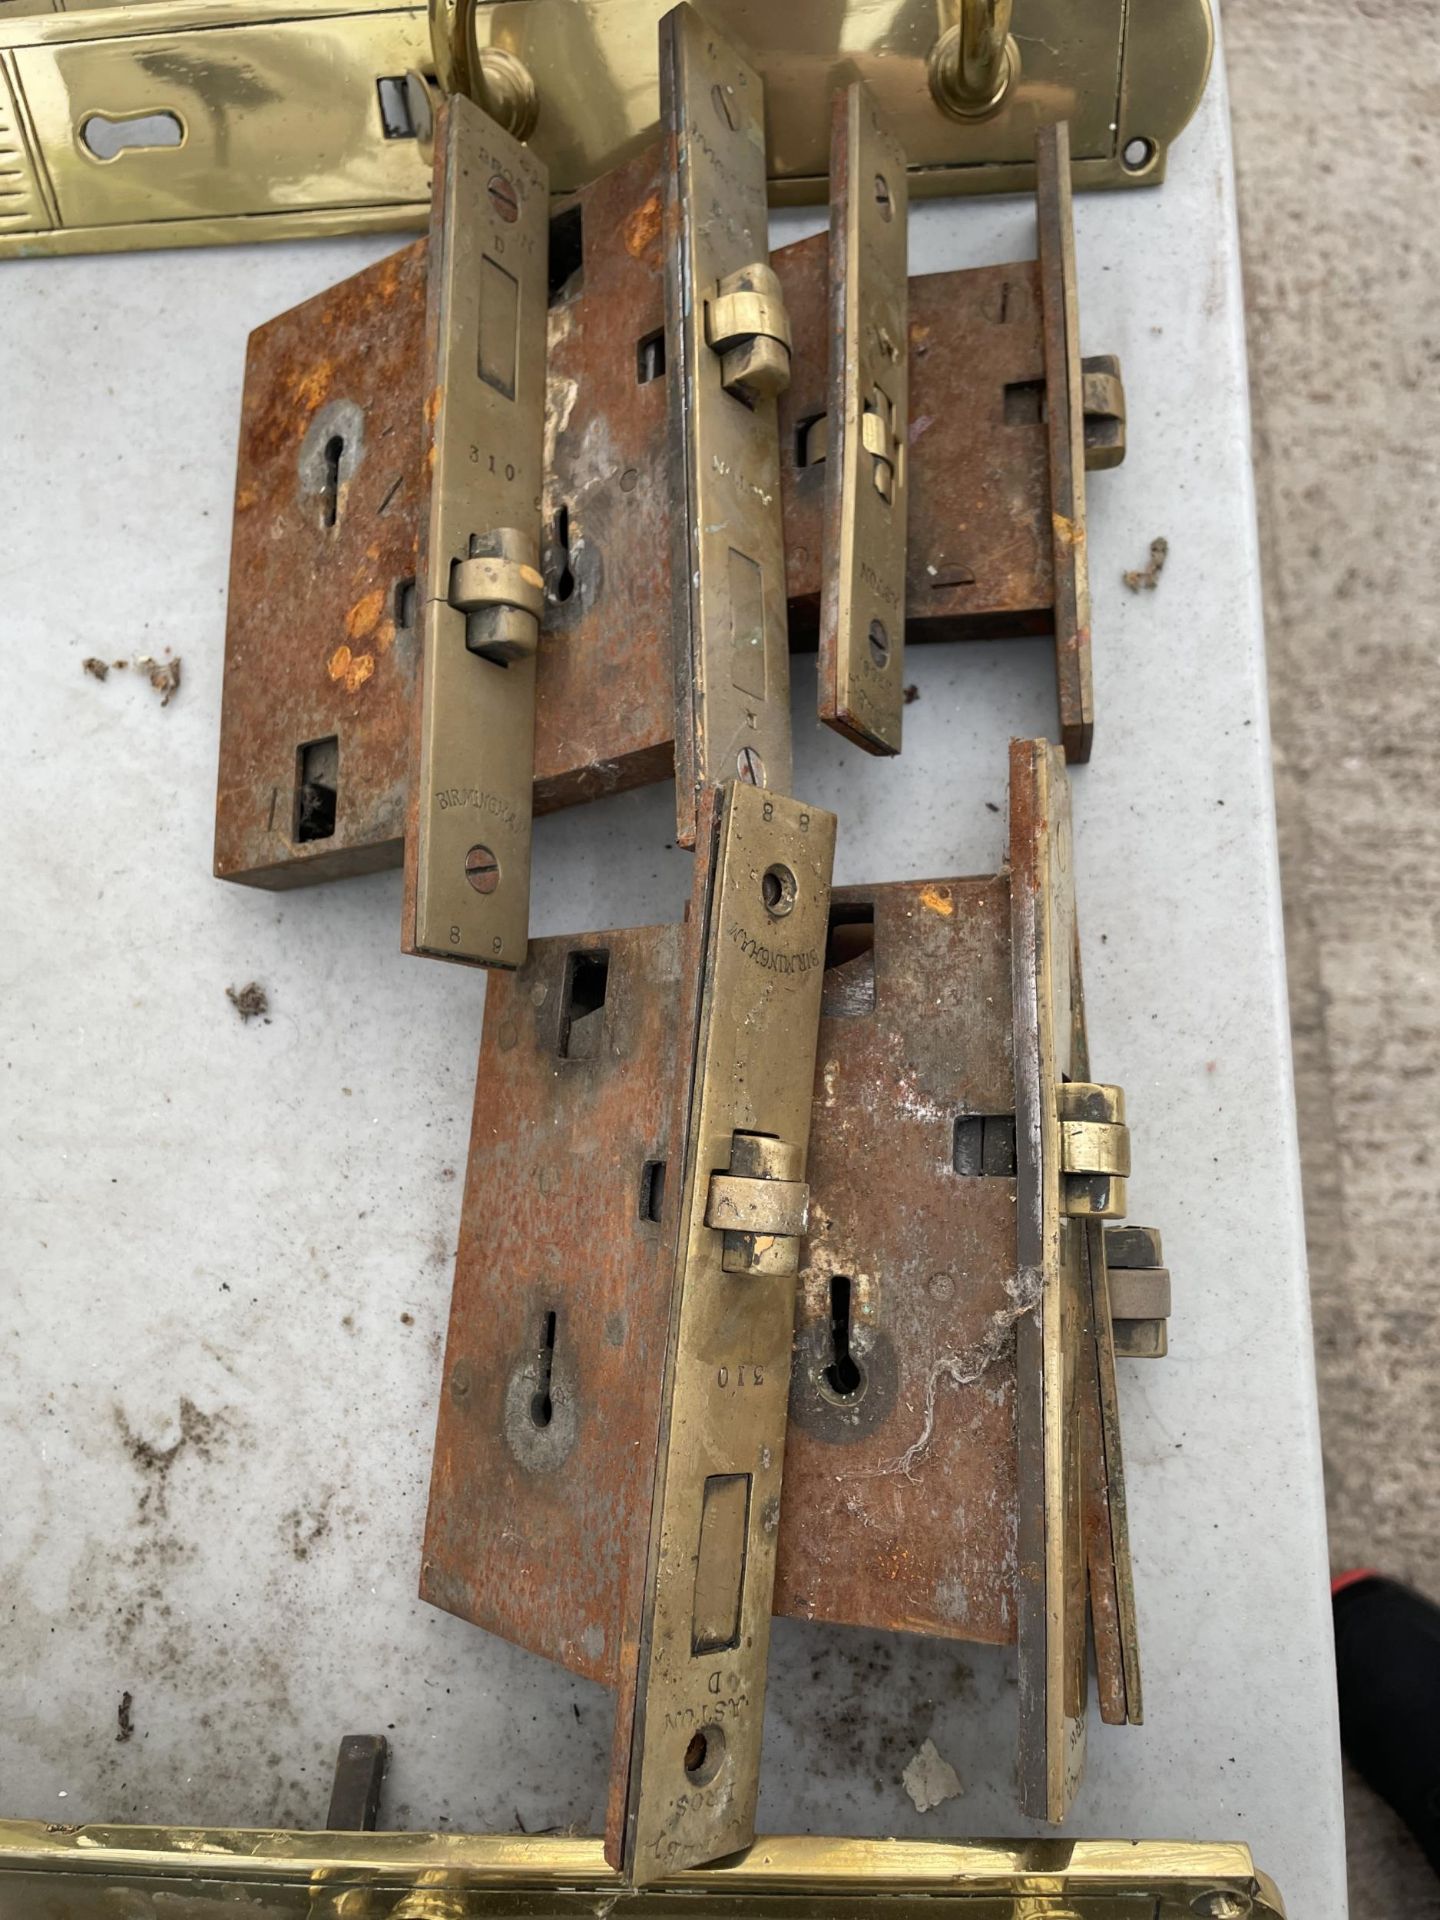 A LARGE QUANTITY OF GOOD QUALITY VINTAGE BRASS DOOR HANDLES AND LOCKS - Image 3 of 3